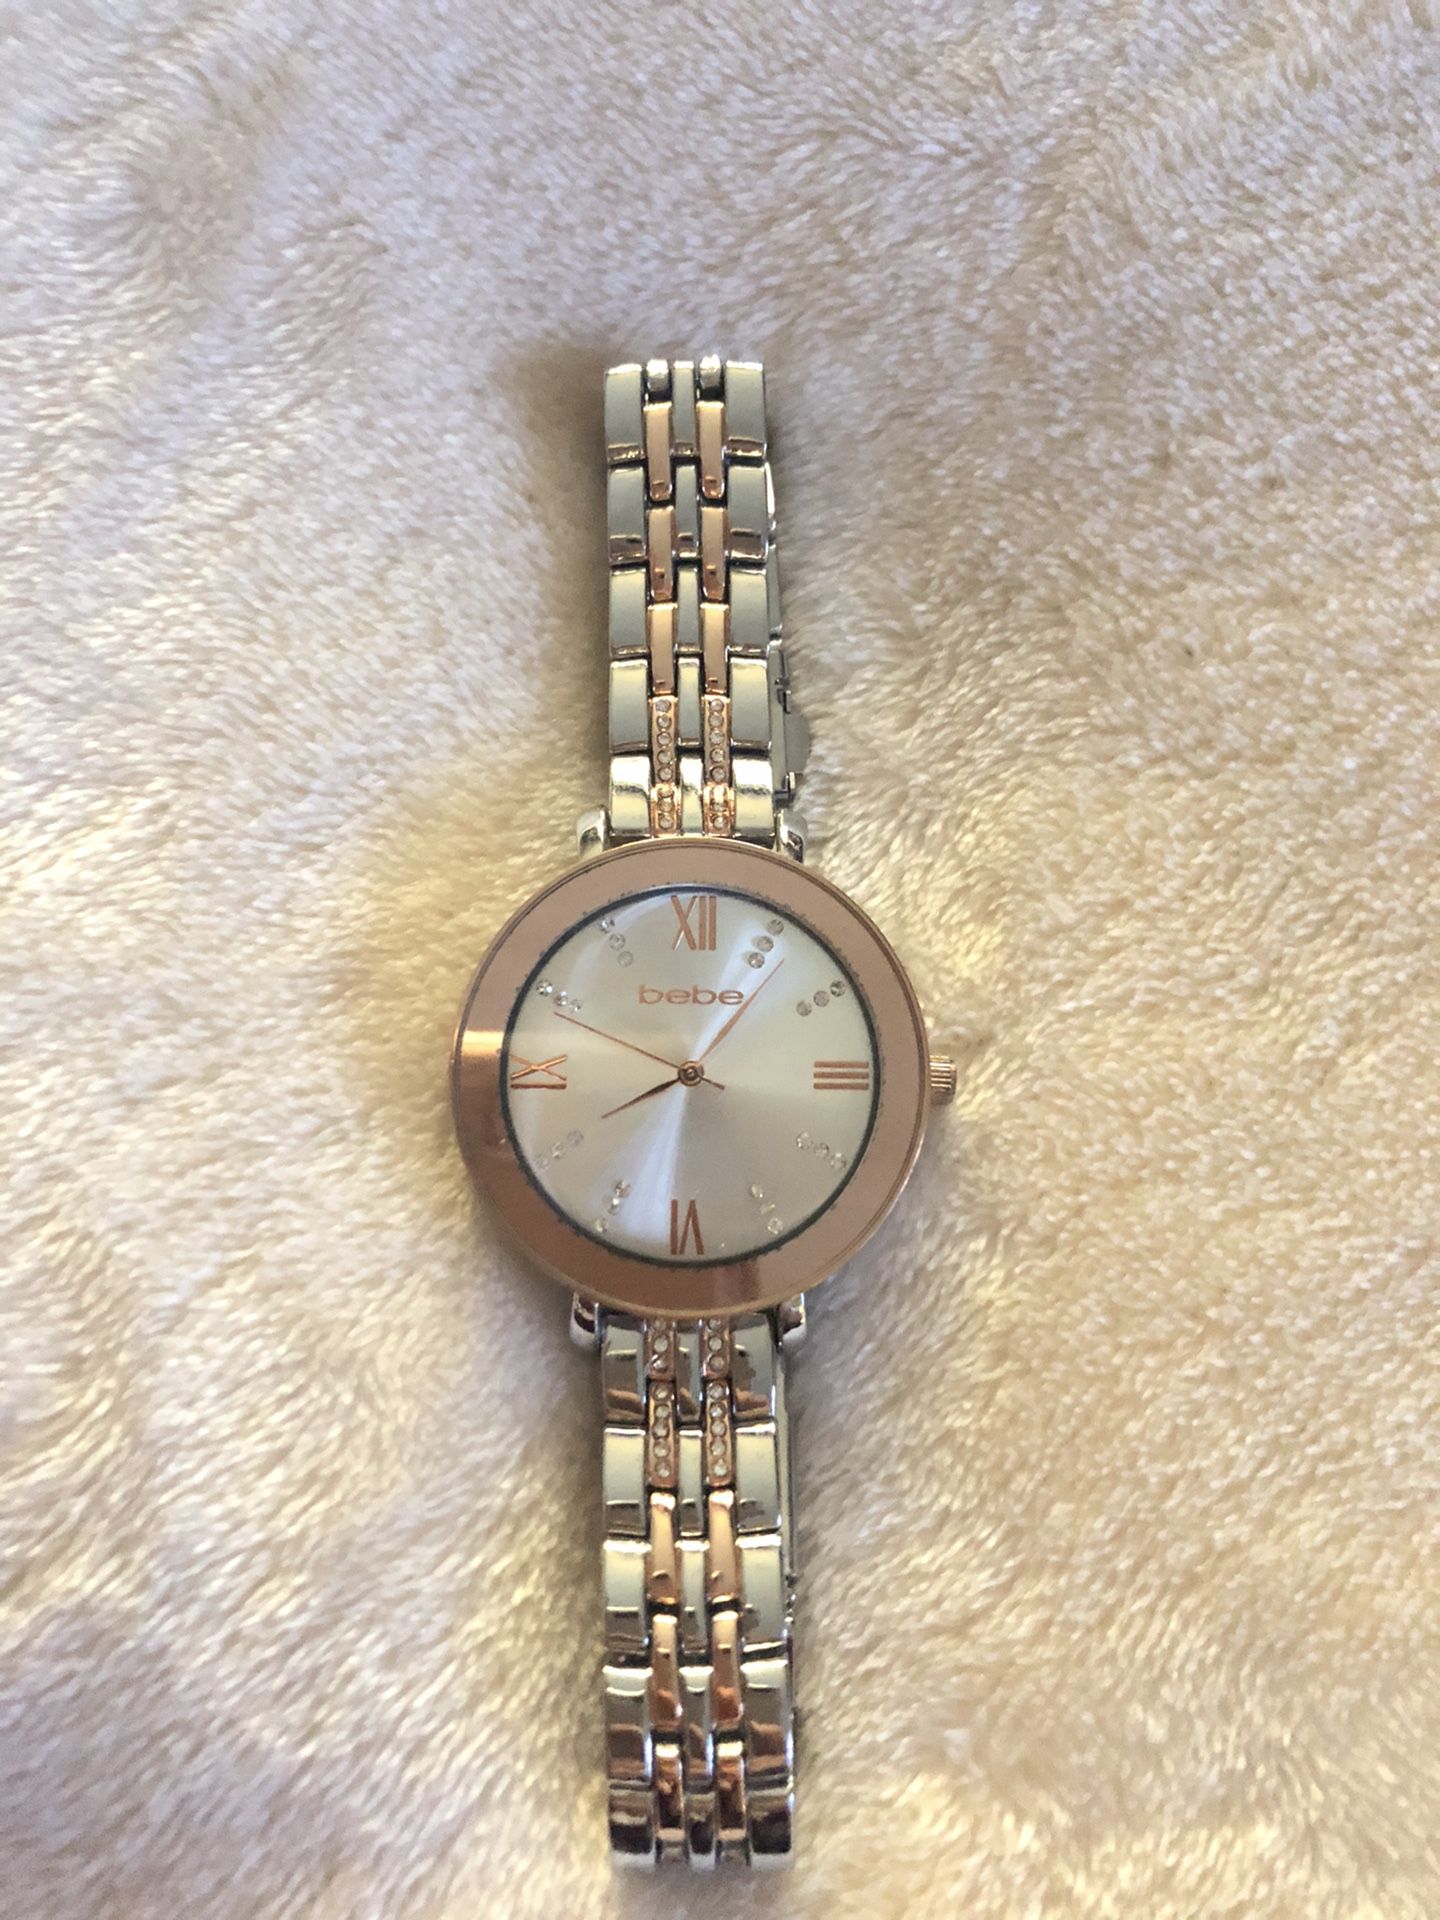 New Rose Gold Bebe Watch For Sale In West Covina Ca Offerup